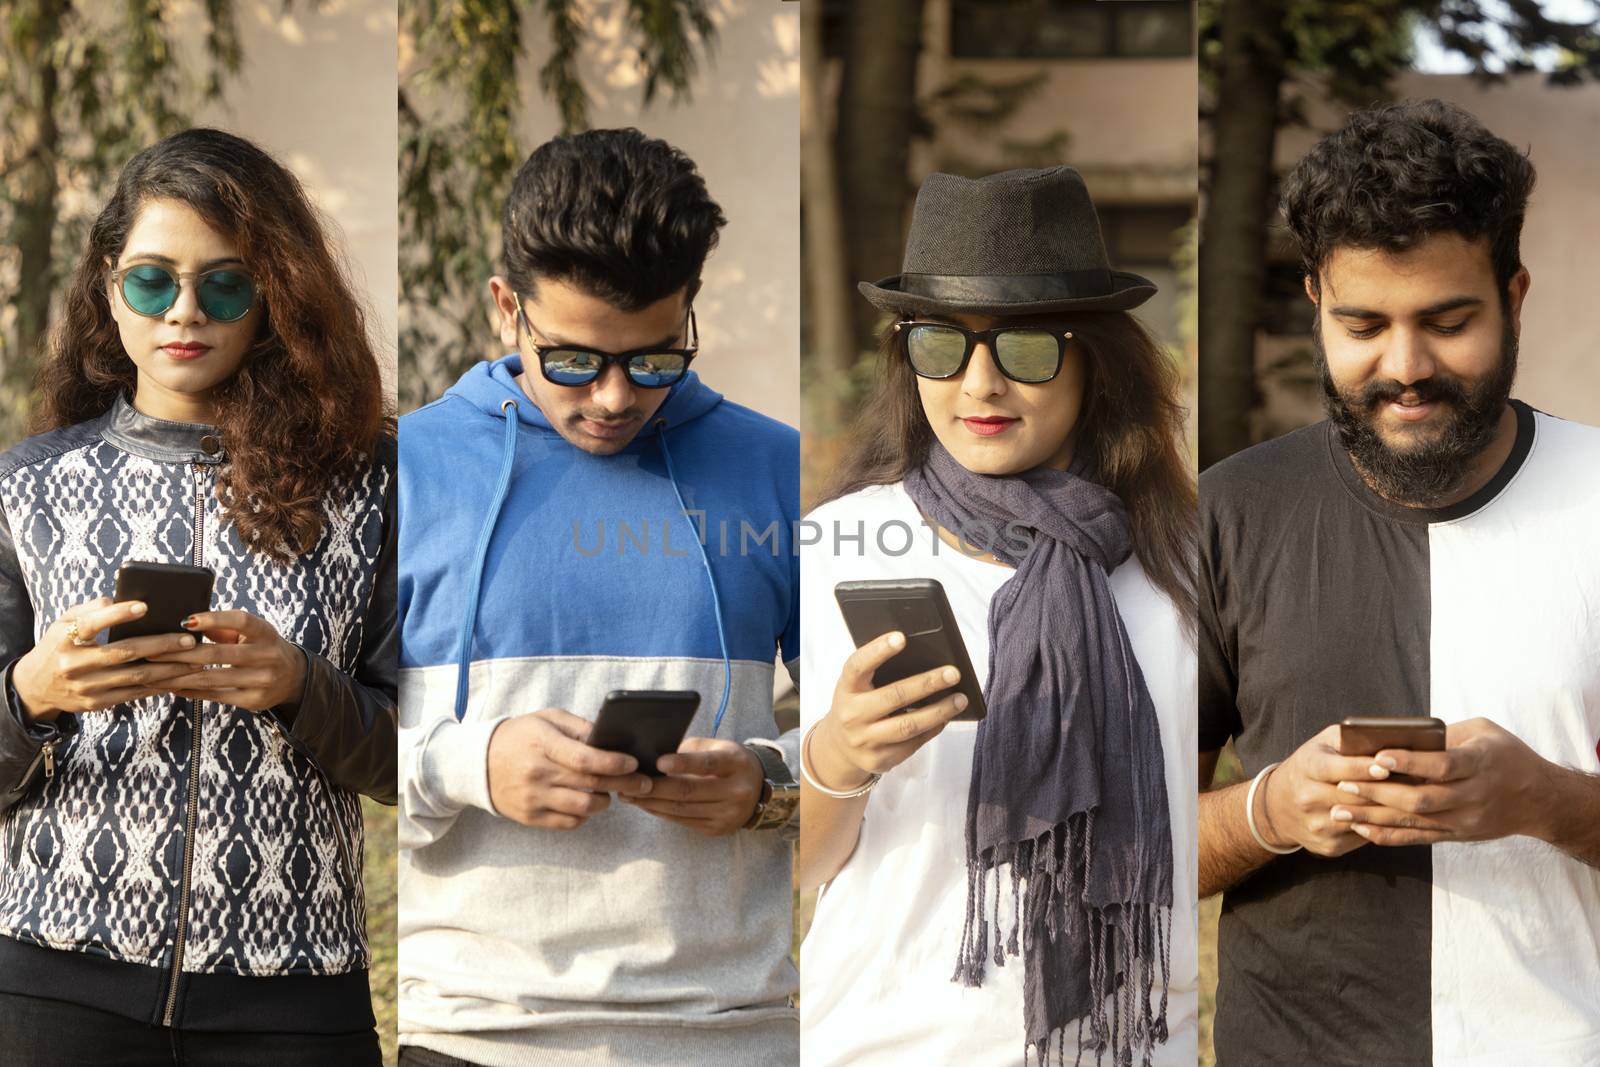 College of people busy on mobile - group of modern trendy millennials using smartphone - concept of social media, internet, e commerce, technology usage.